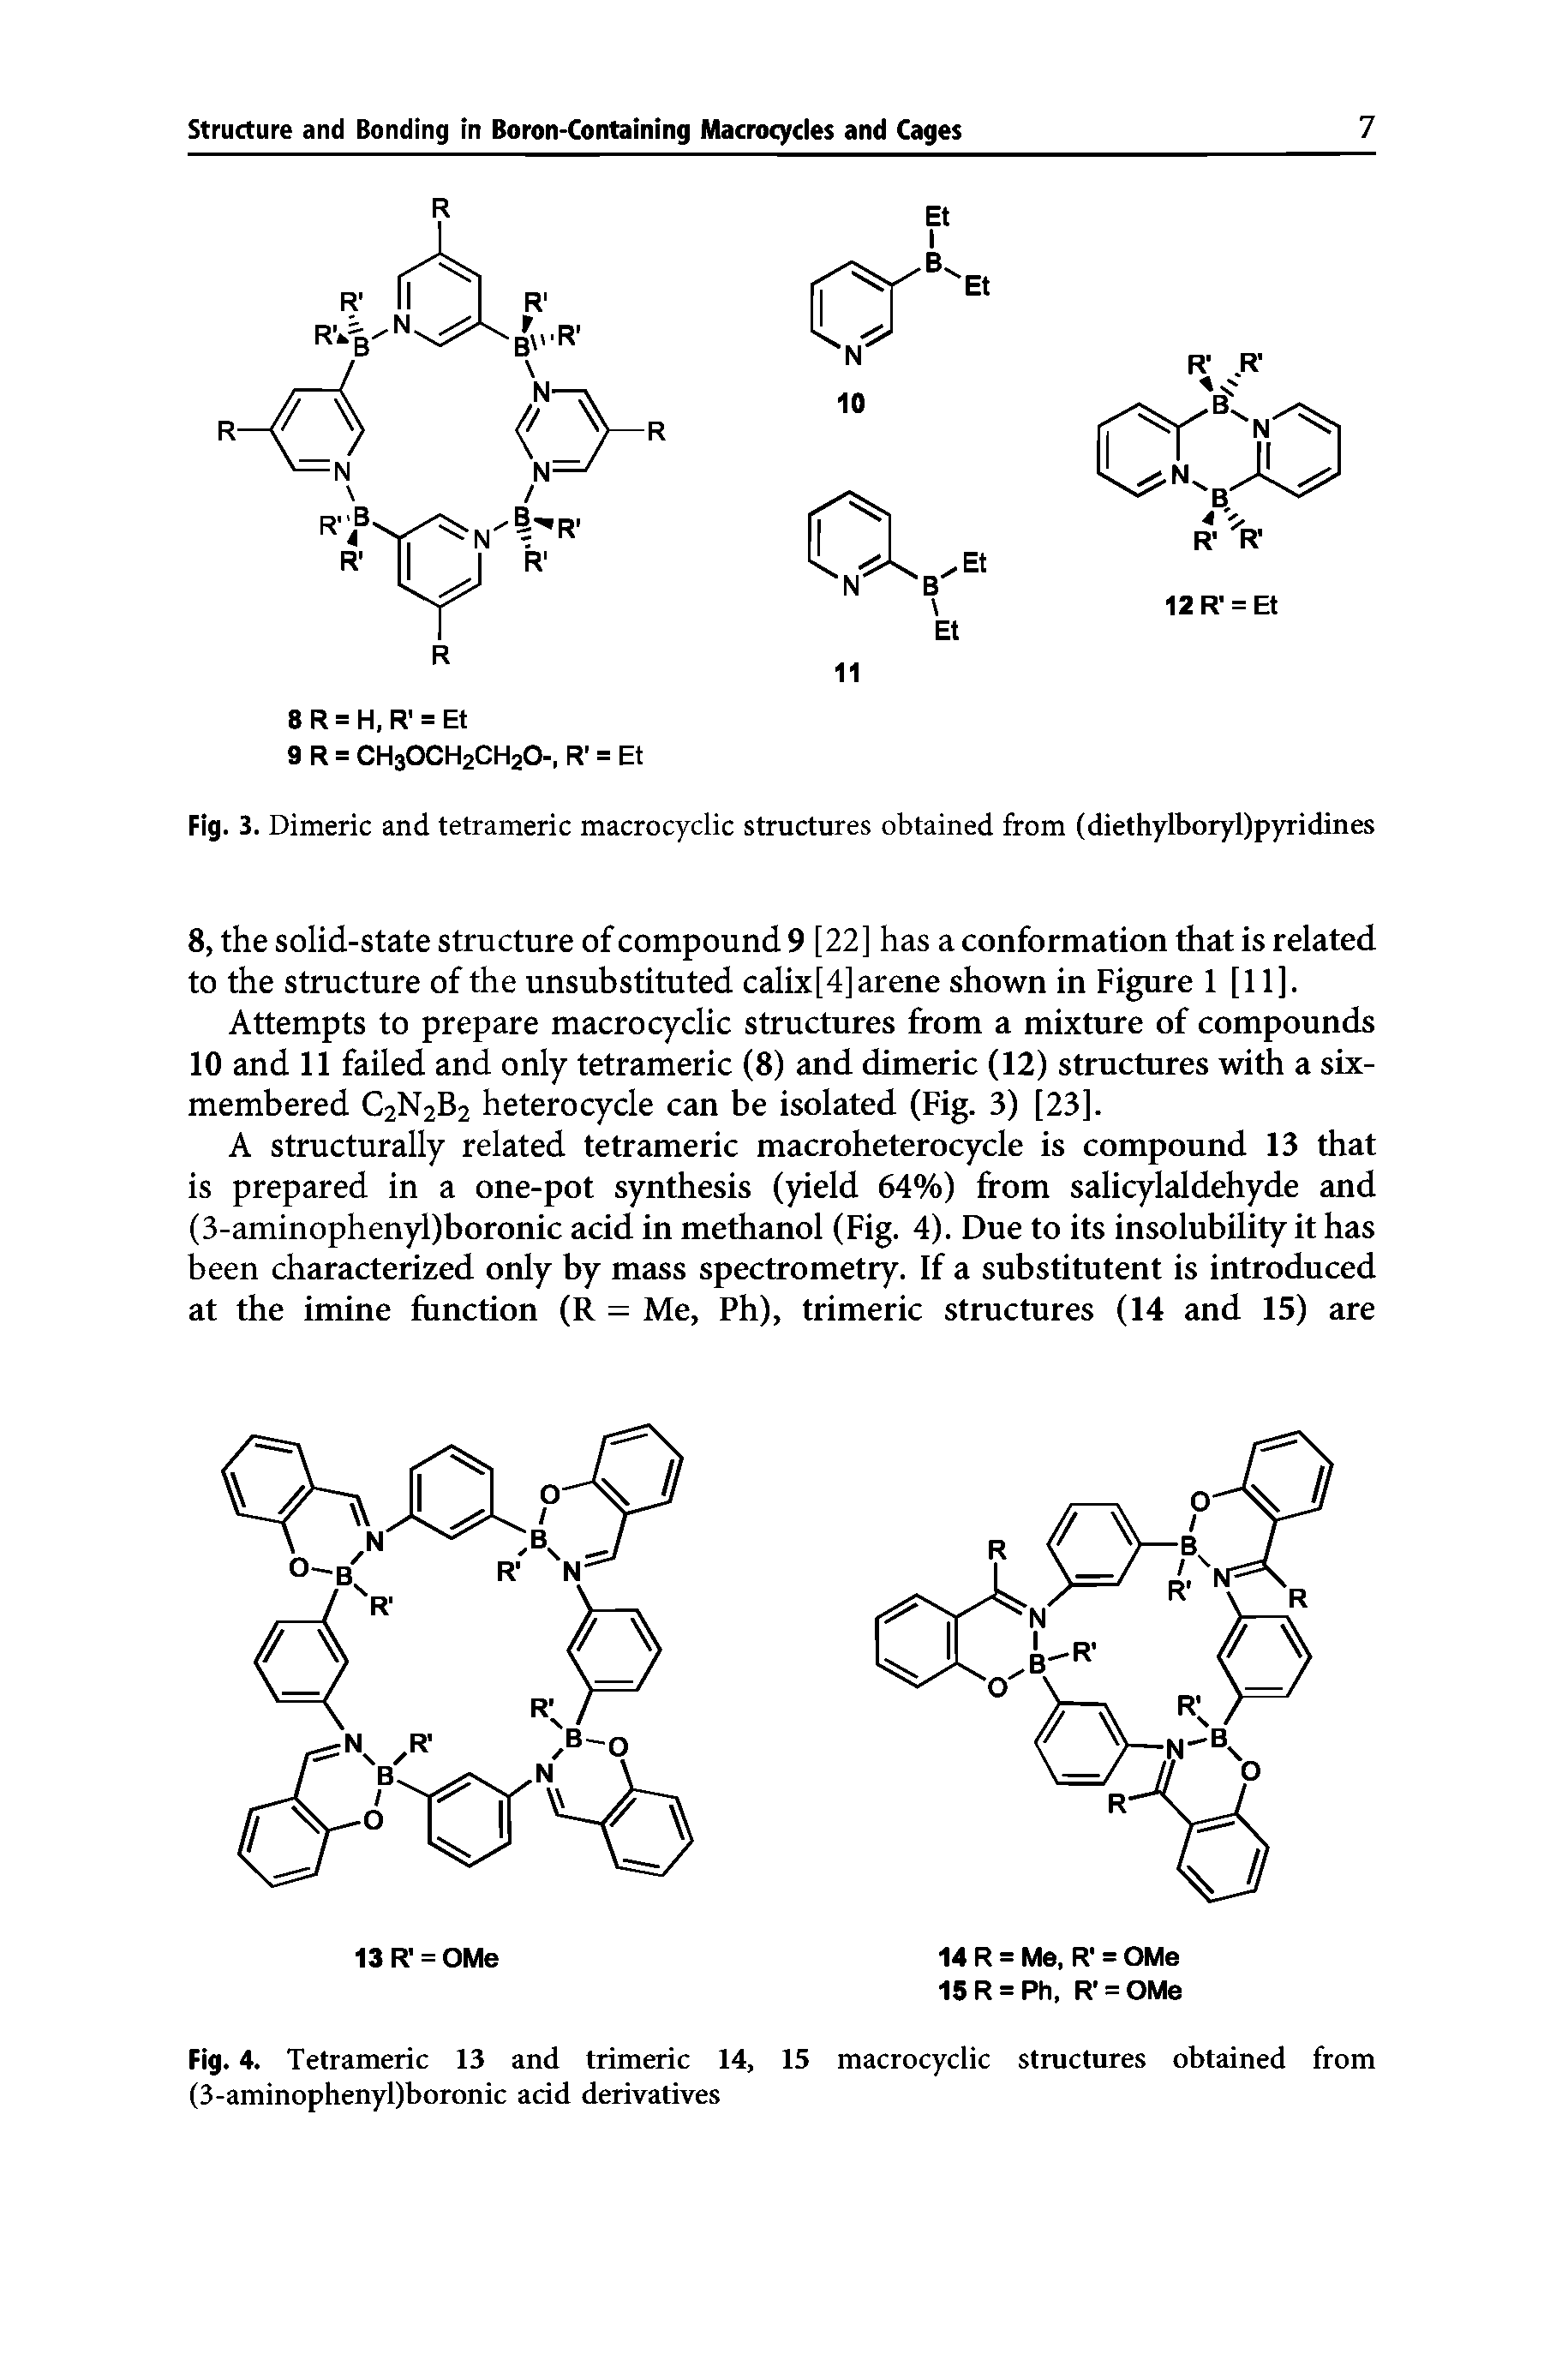 Fig. 4. Tetrameric 13 and trimeric 14, 15 macrocyclic structures obtained from (3-aminophenyl)boronic acid derivatives...